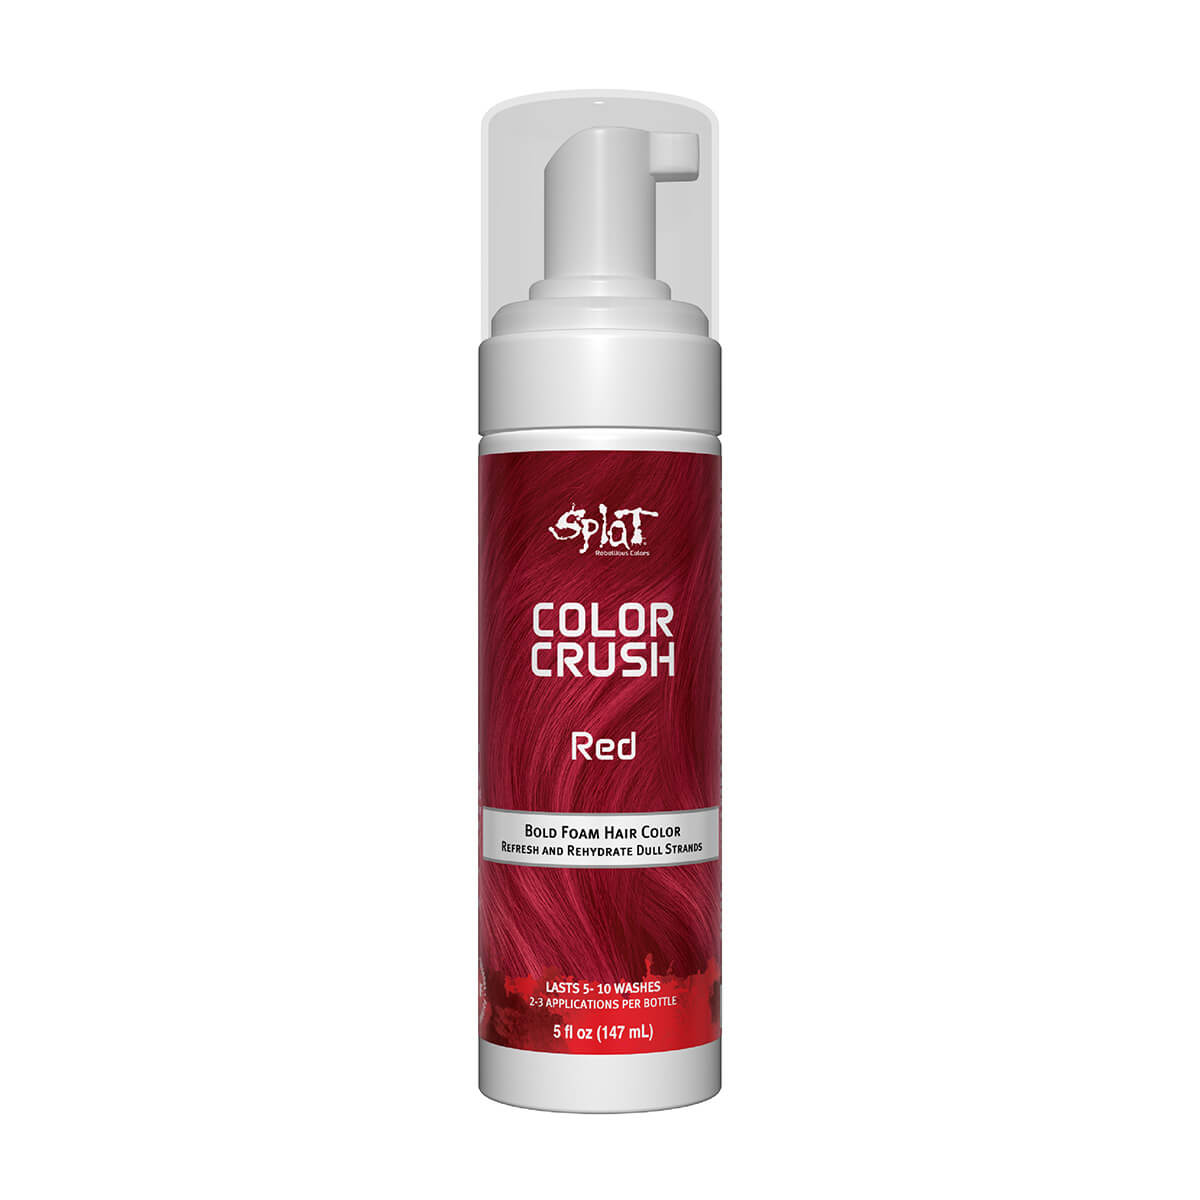 A box of Color Crush Red  Hair Dye